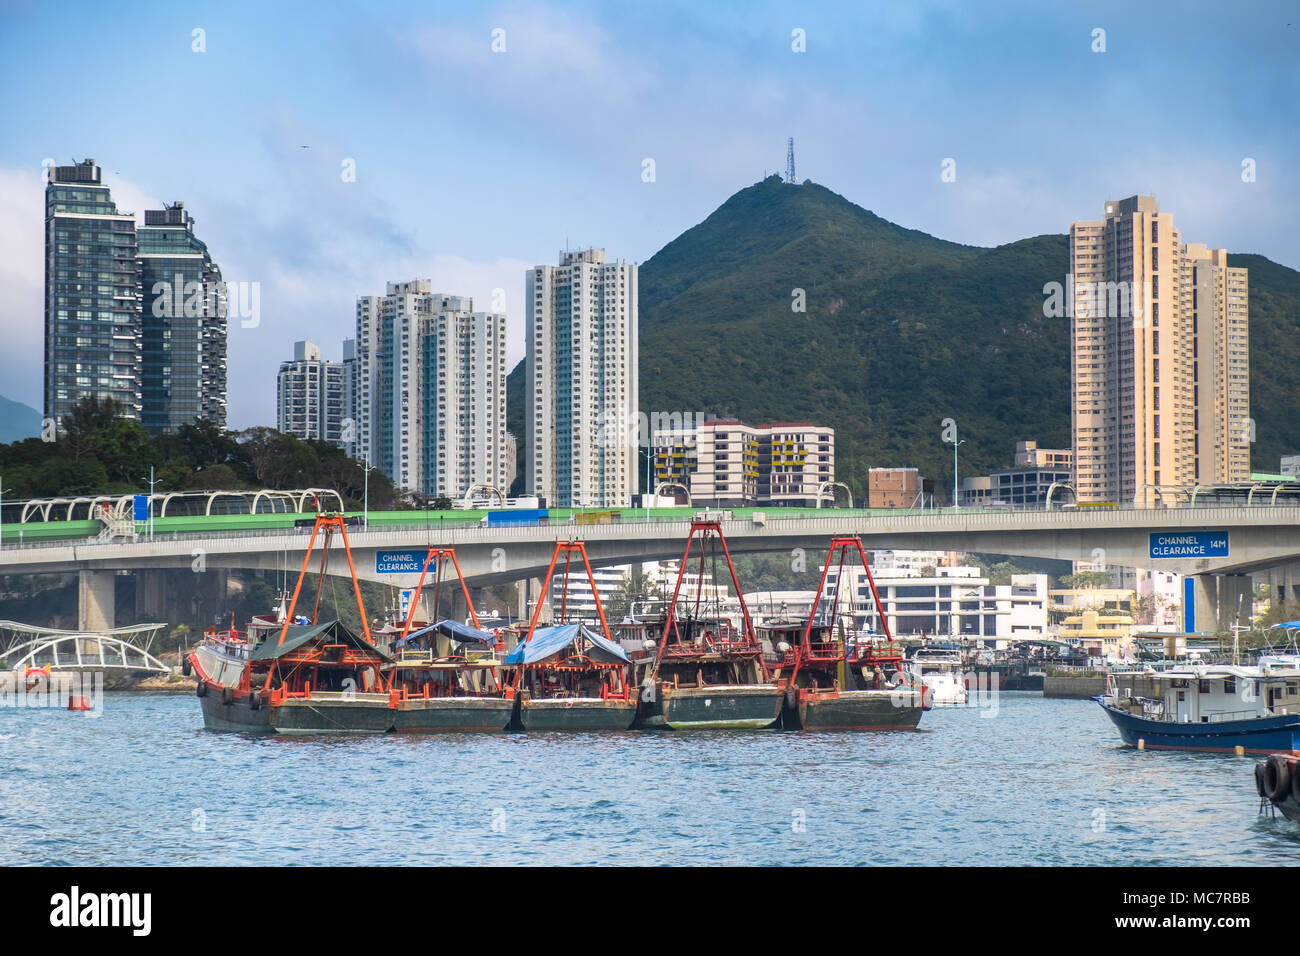 Fishing trawlers in Hong Kong Aberdeen Bay. Transport bridge, buildings, skyscrapers on background. City geometry and South East Asia beautiful nature Stock Photo